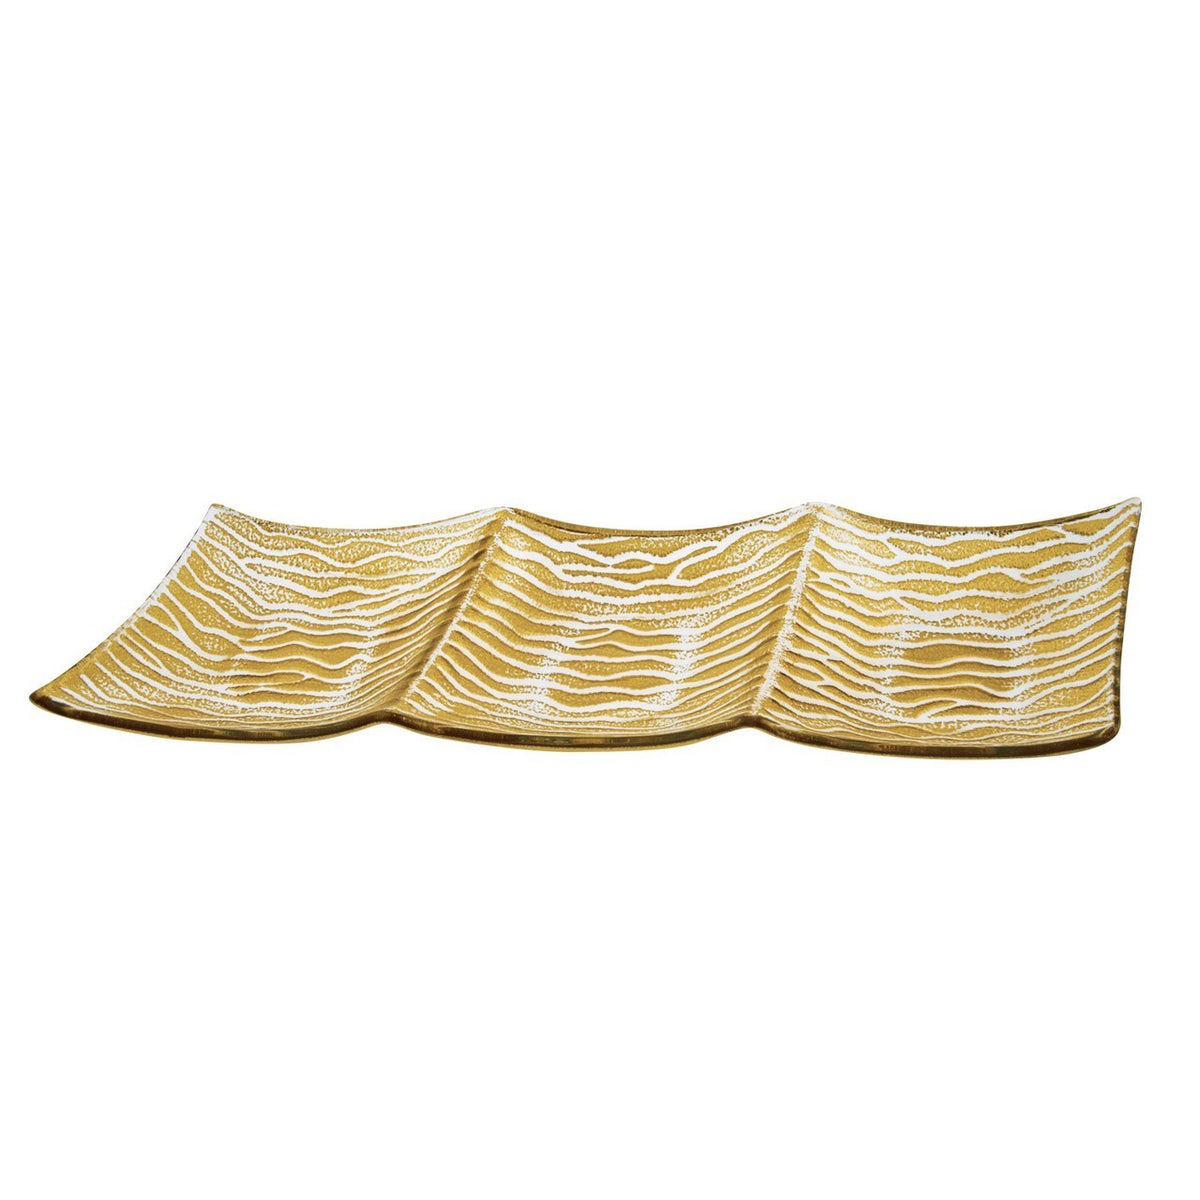 Gold Wave 3 Section Tray 5.5 in x 16 inches